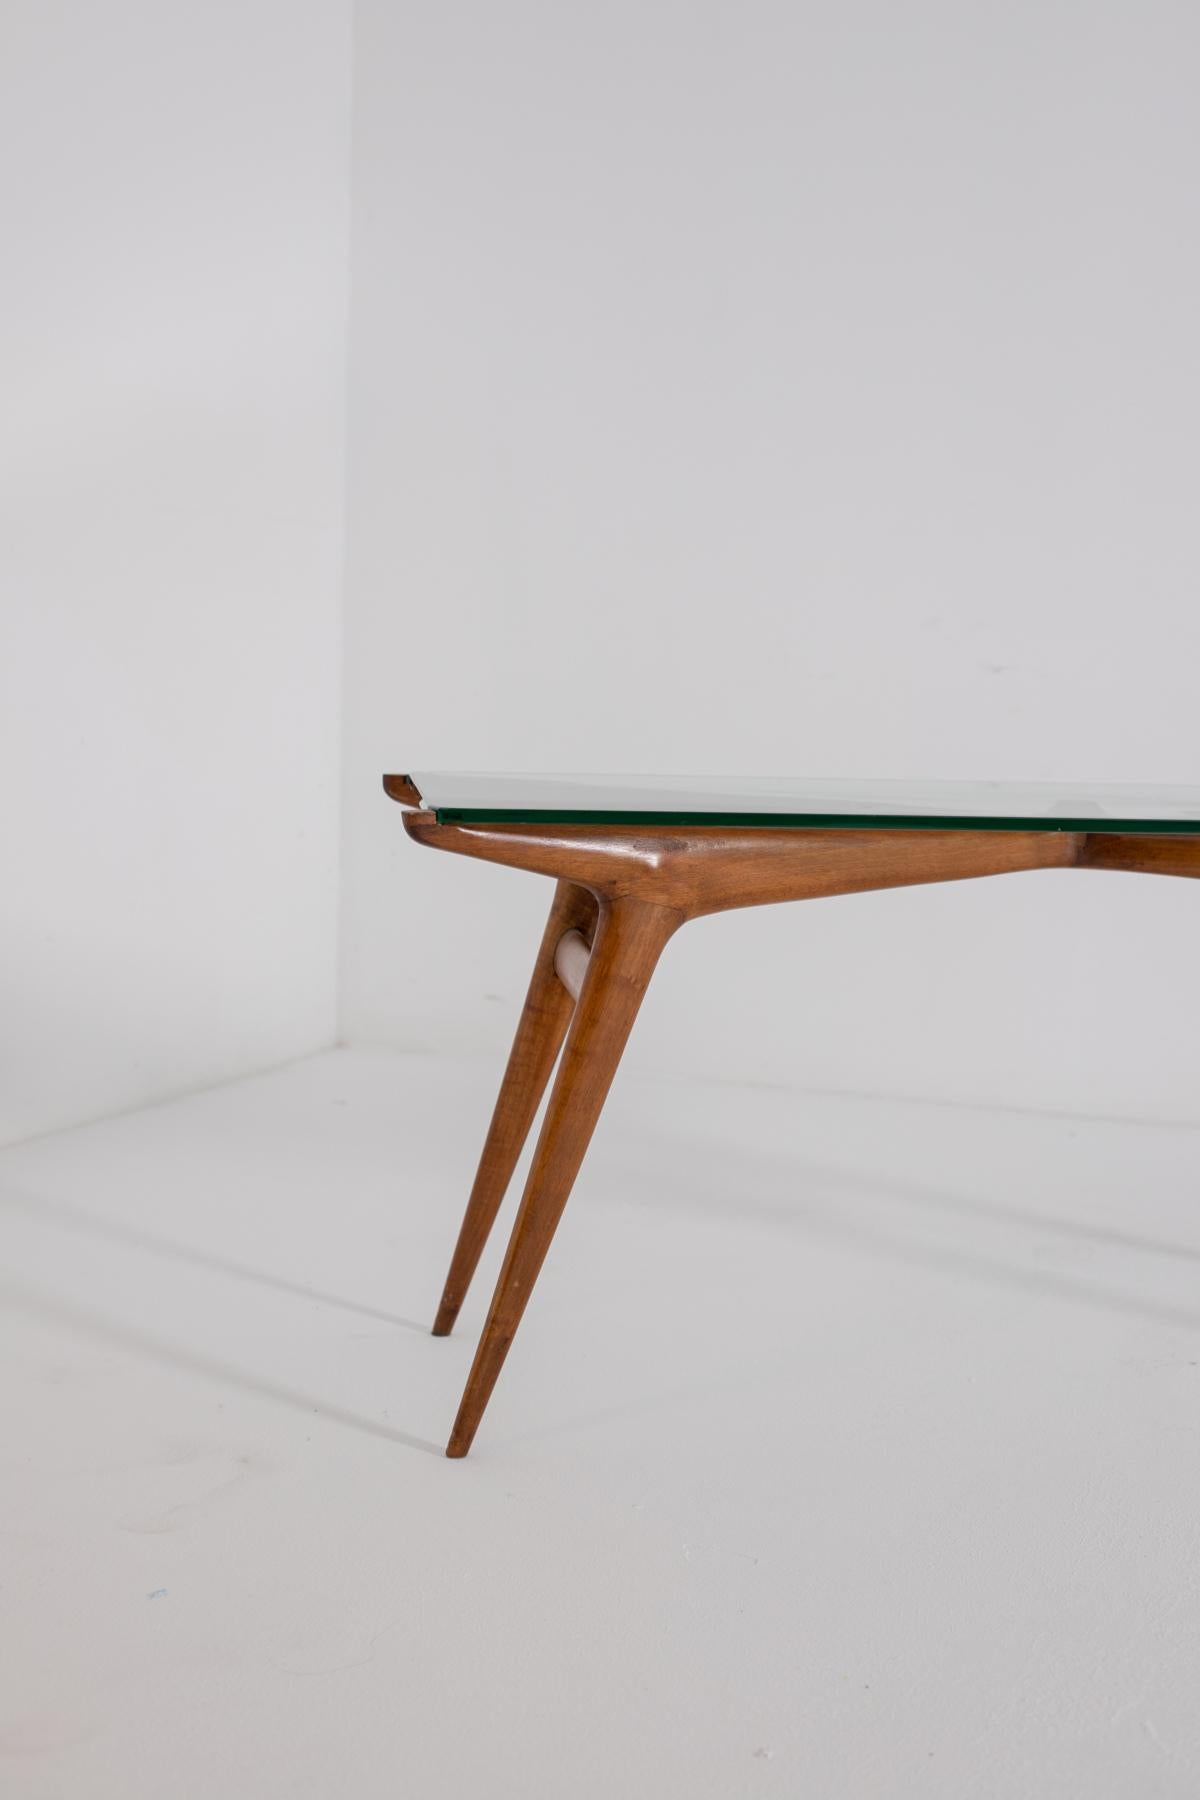 Wonderful smoking table from the 1950s designed by the great architect and designer Carlo de Carli.
The feature of this beautiful smoking table is that the base of the table was made of finely crafted wooden ashlar, and that distinguishes the